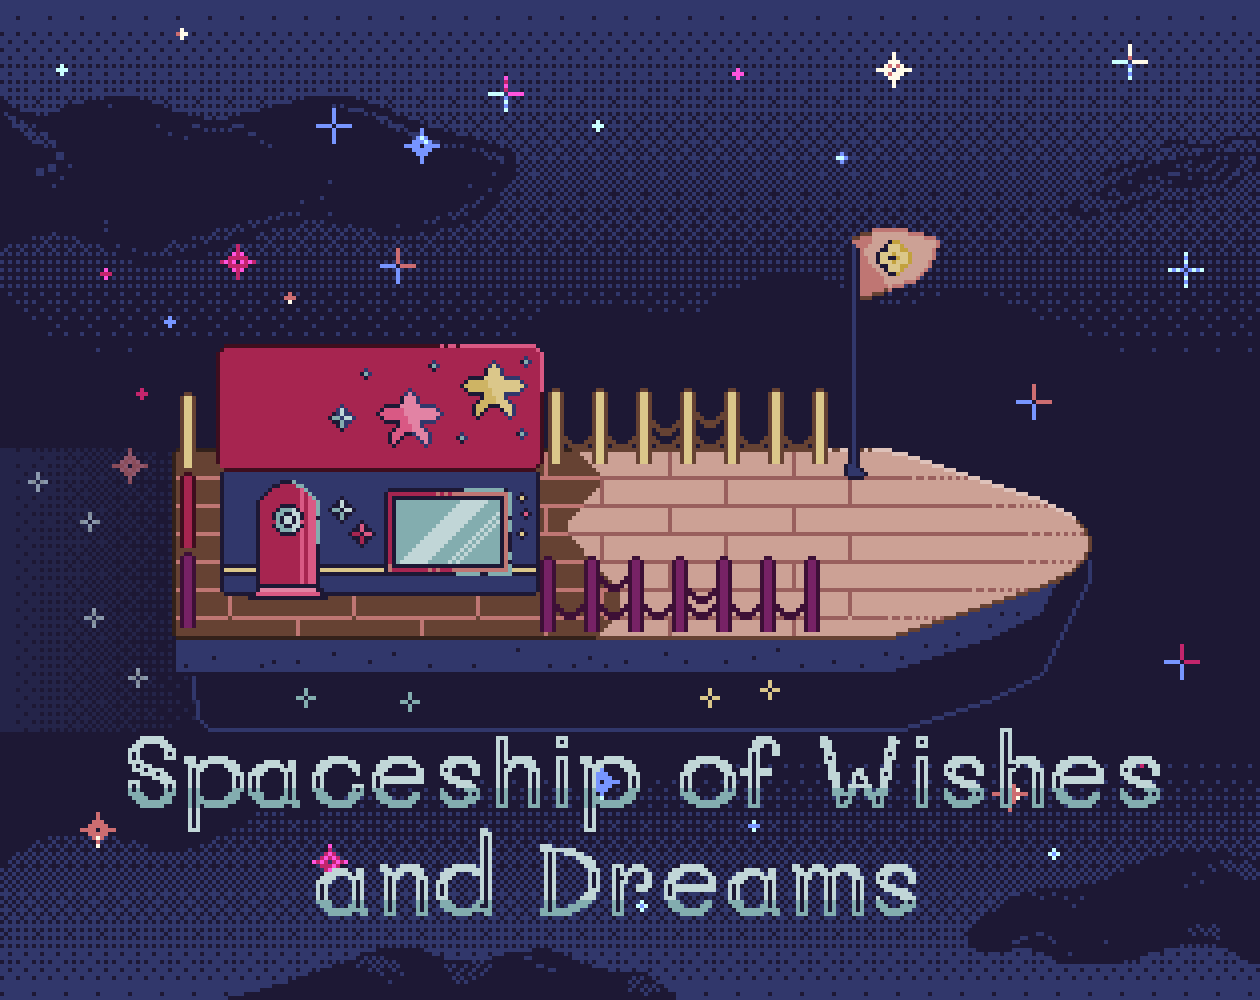 The Spaceship of Wishes and Dreams